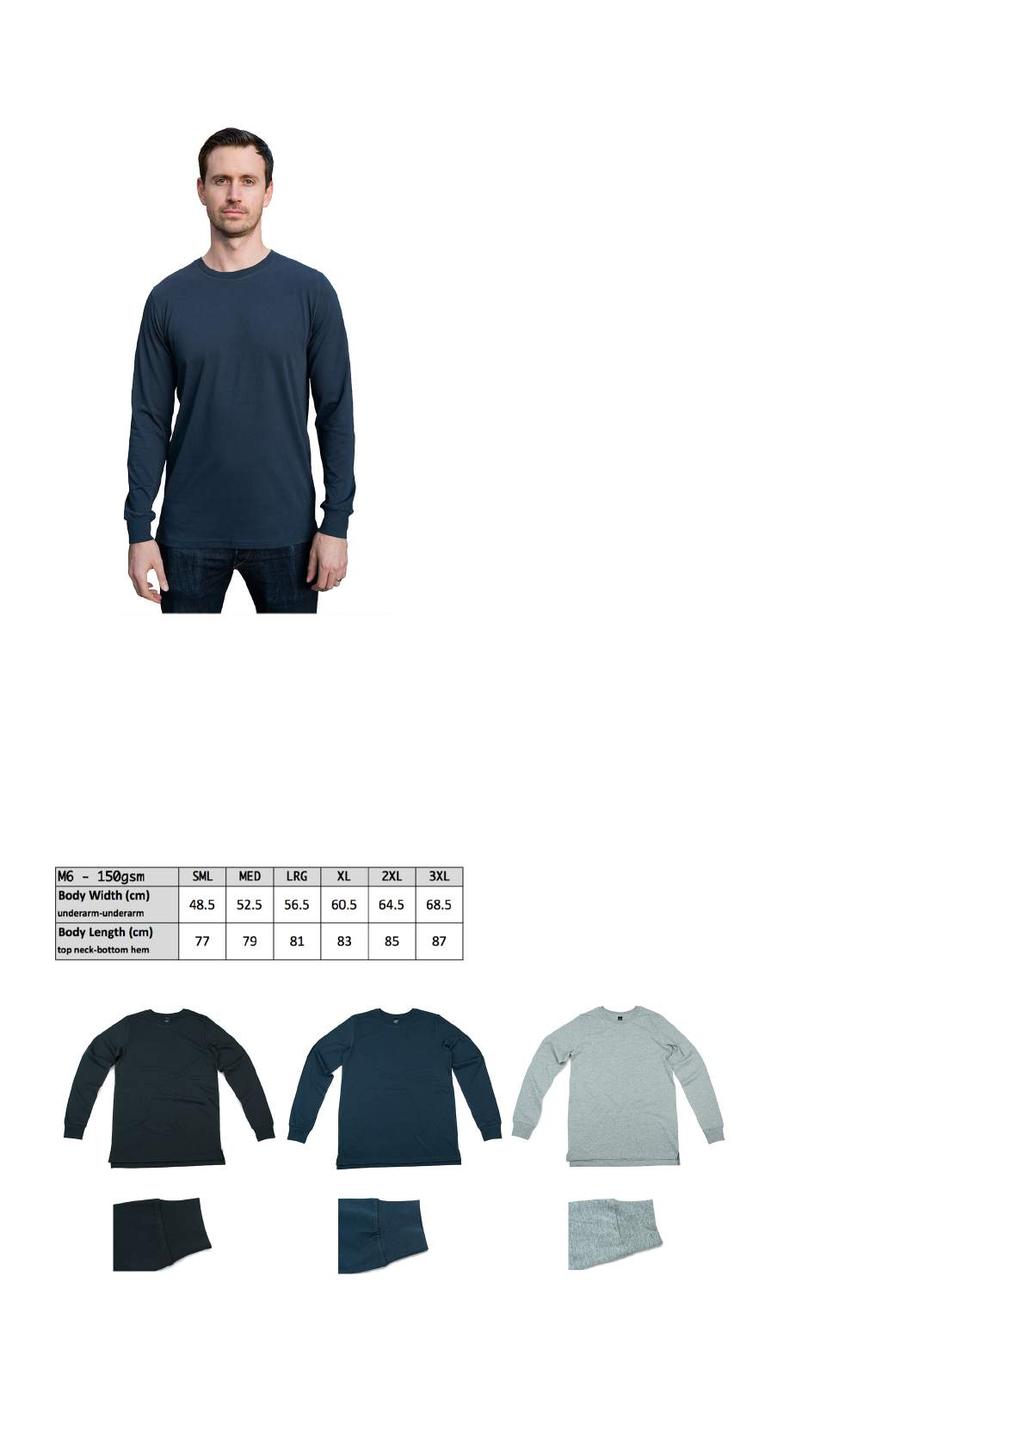 M6 - Mens Long Sleeve With Cuffs Our Mens Long Sleeve with cuffs is similar to the classic long sleeve tee however we have created it to be a little bit wider in fit with cuffs